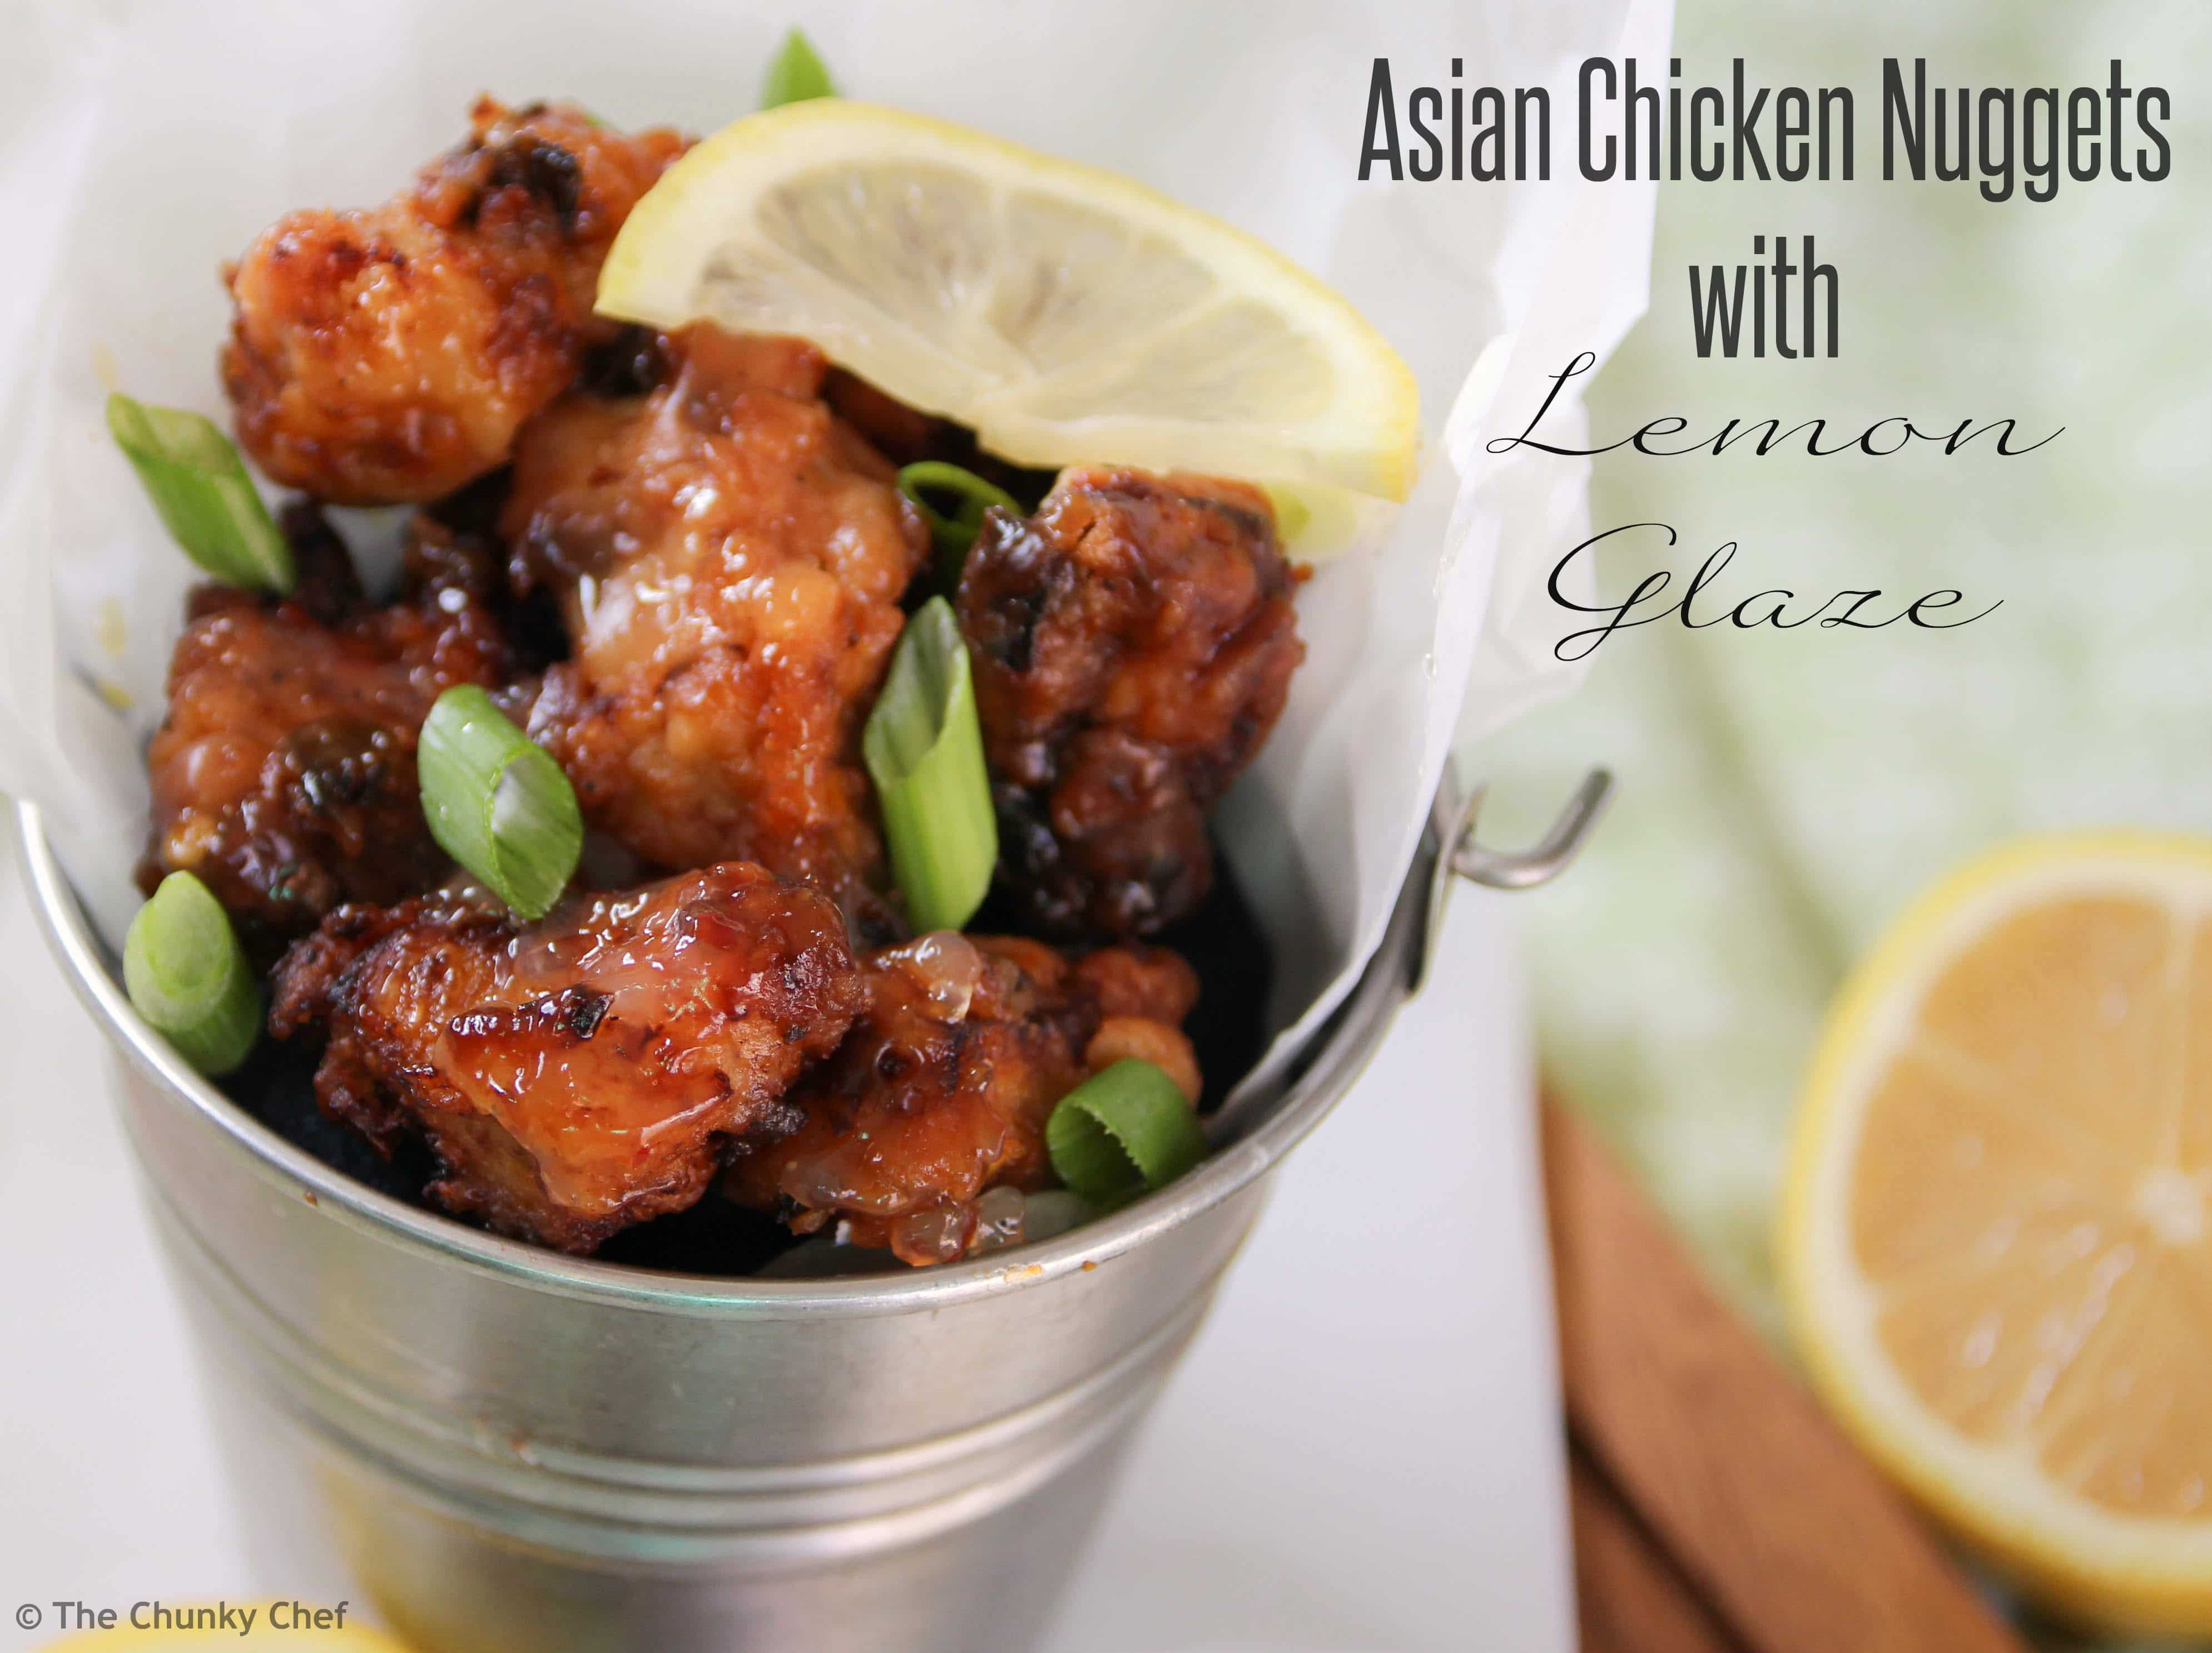 Asian-style Chicken Nuggets - The Chunky Chef